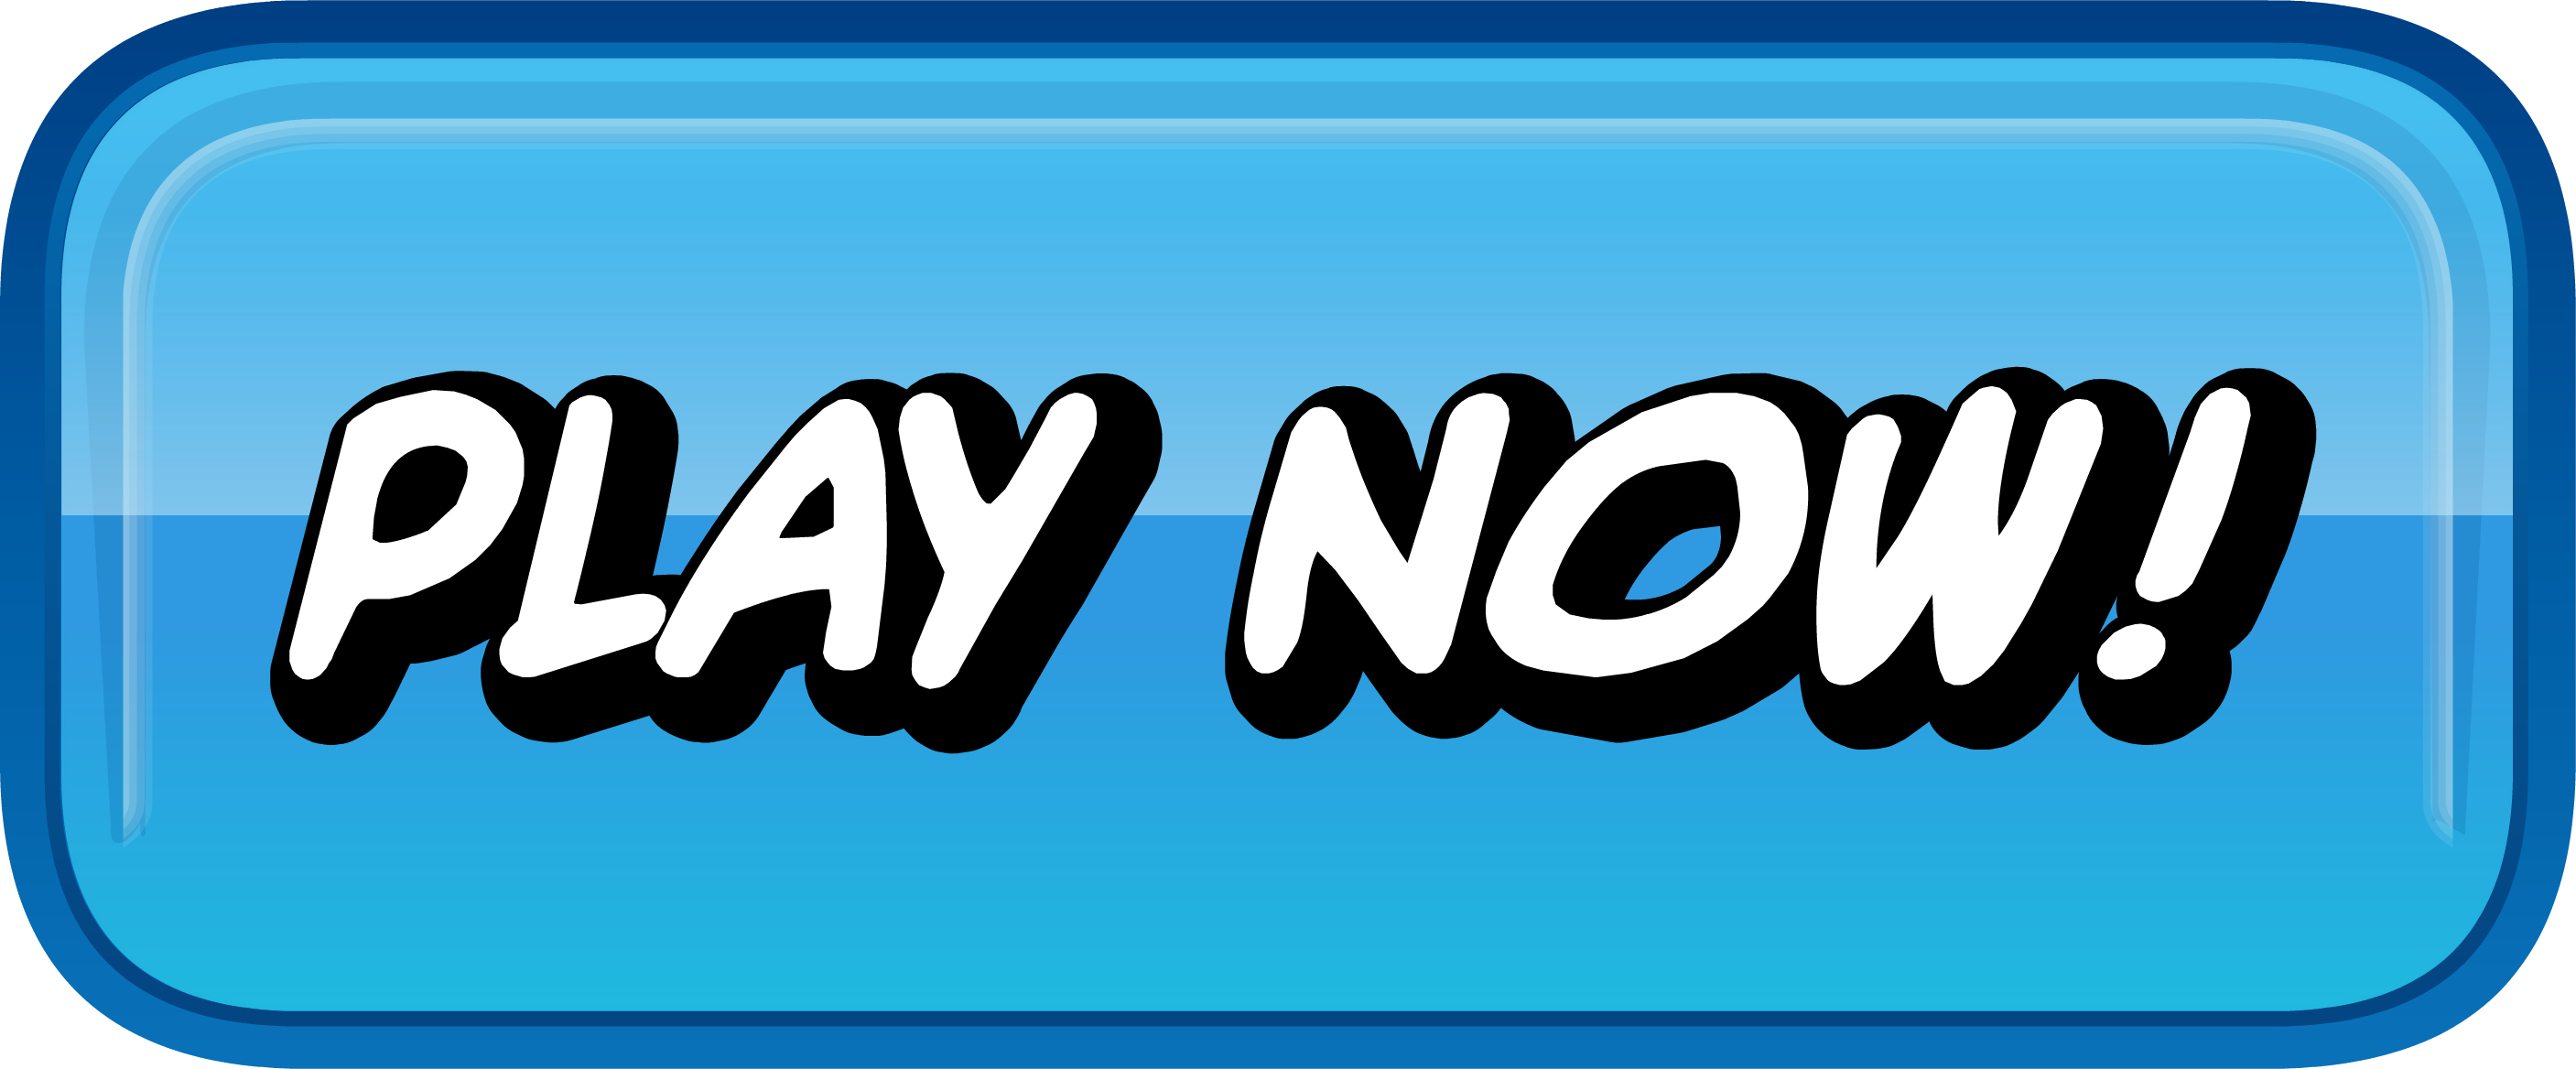 Play Now Button Photos PNG Image